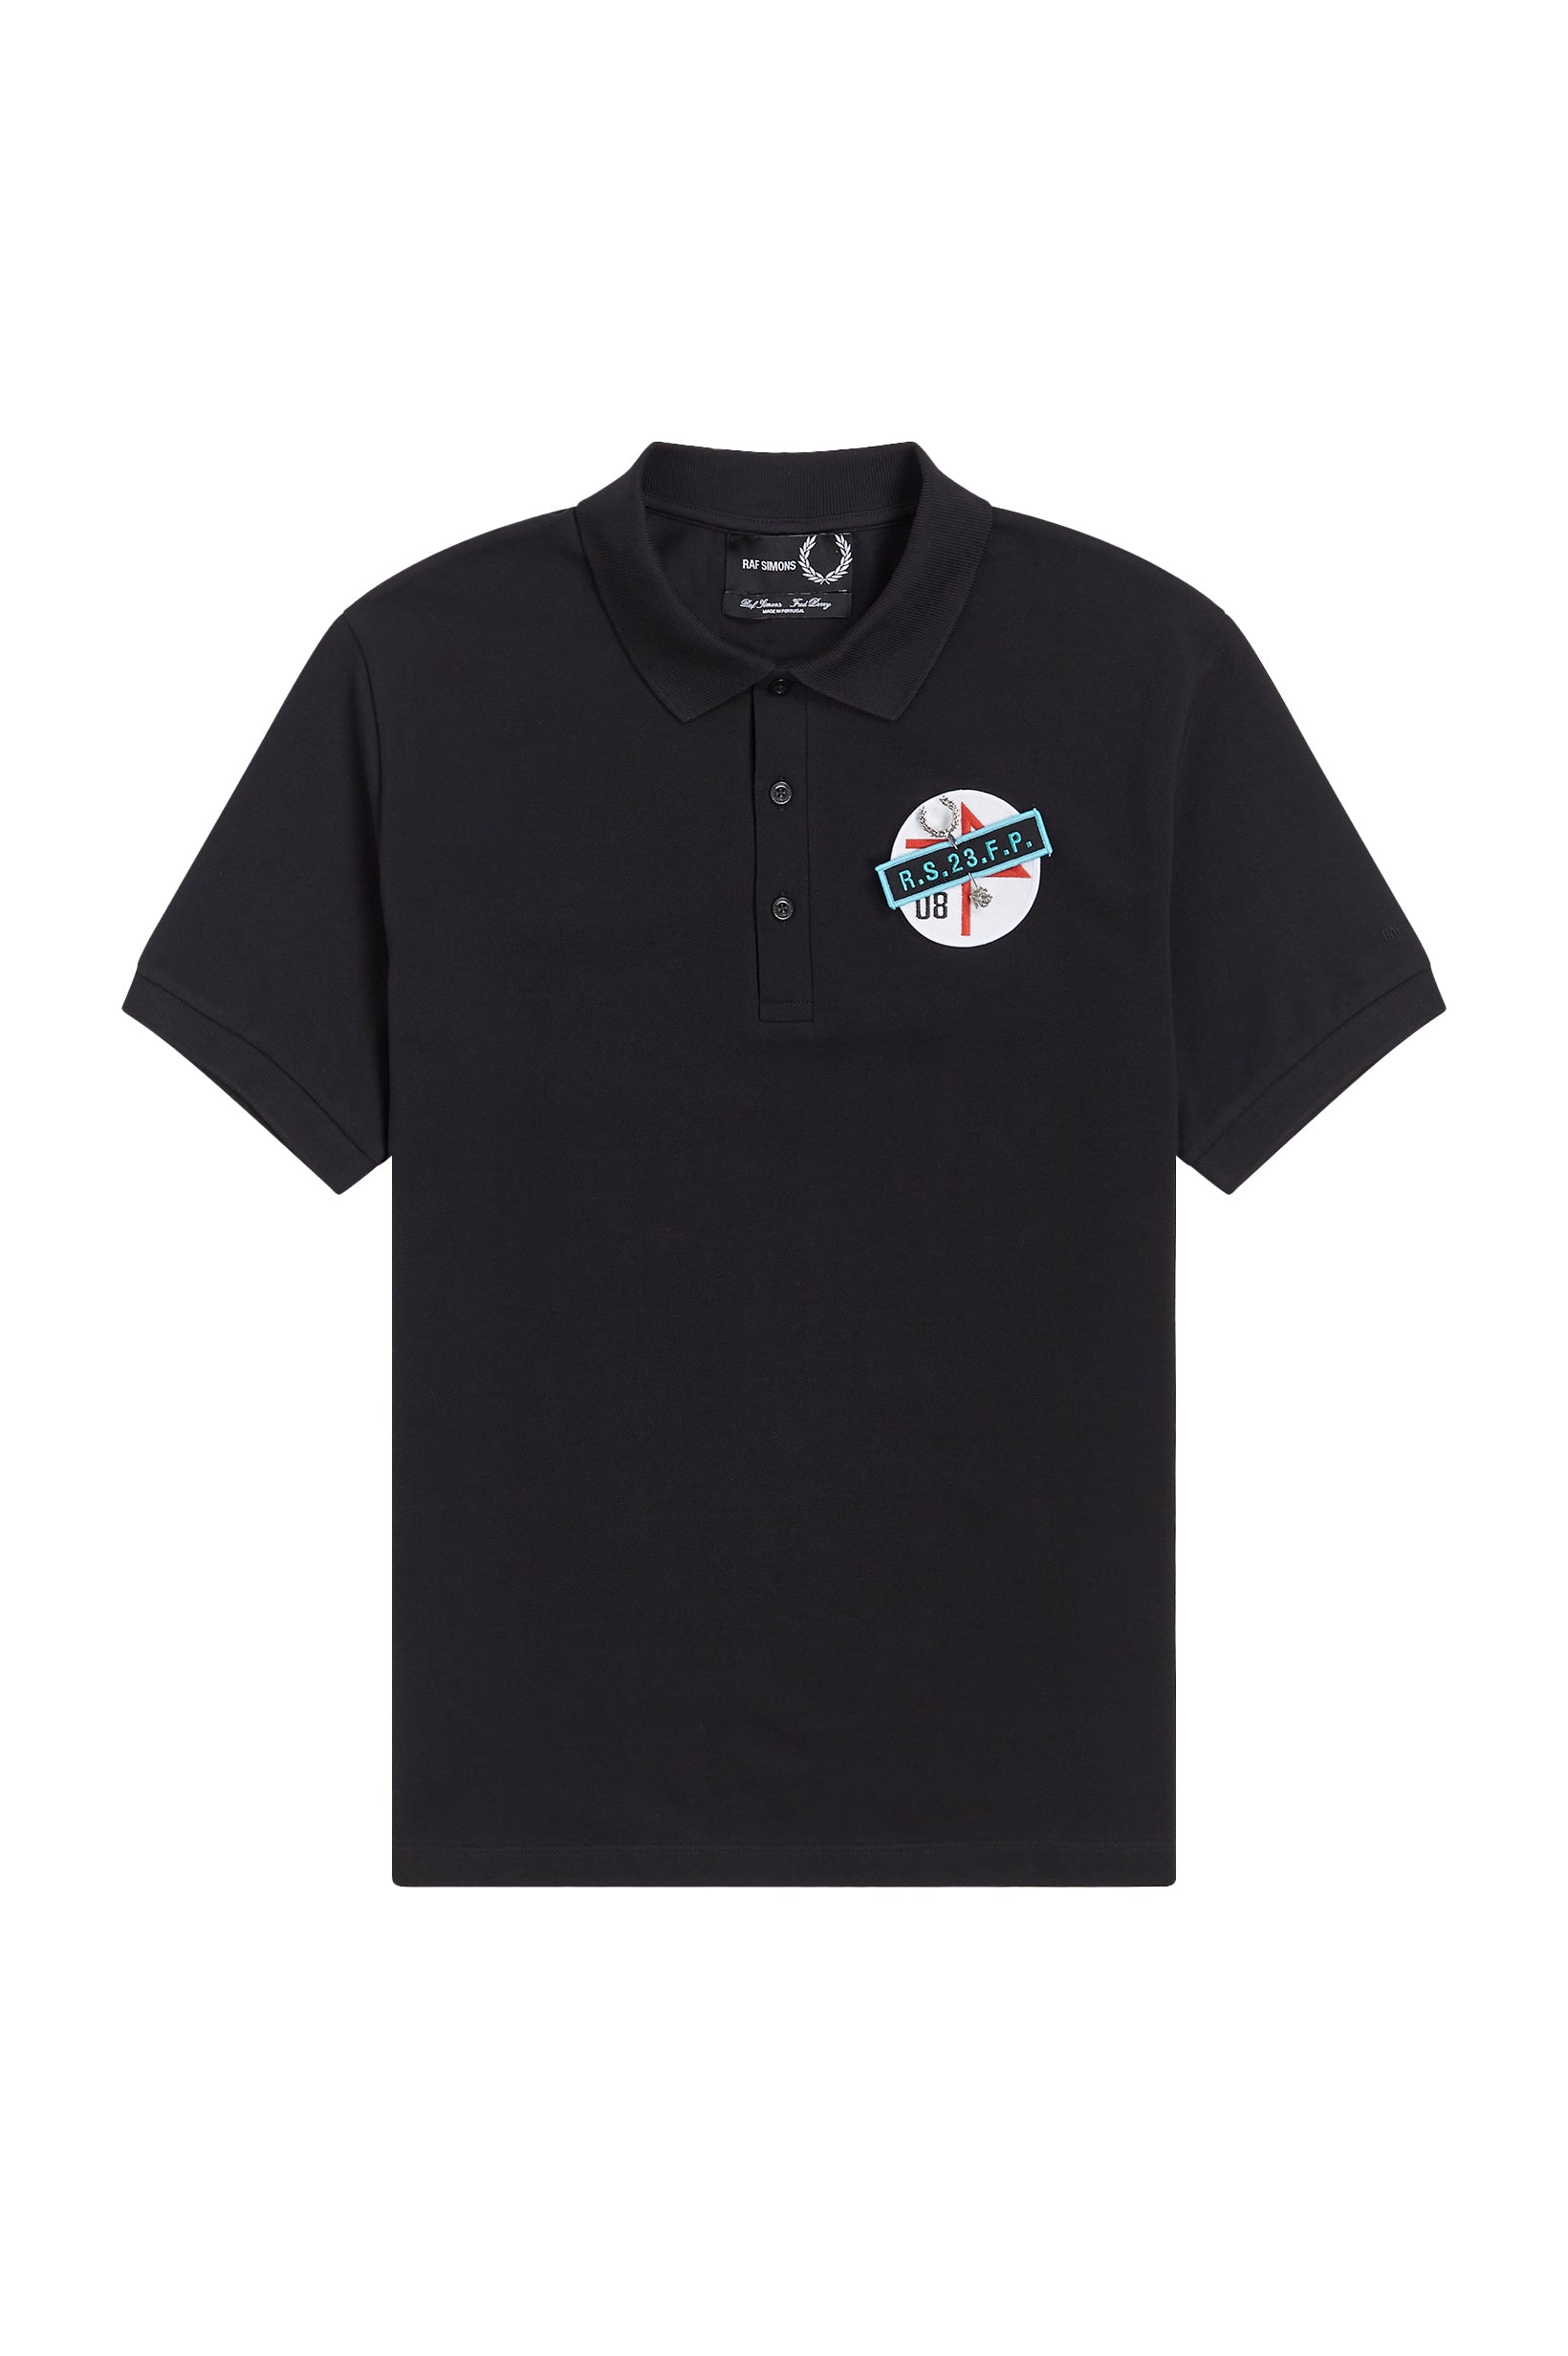 Fred Perry x Raf Simons Patched Polo Shirt Black